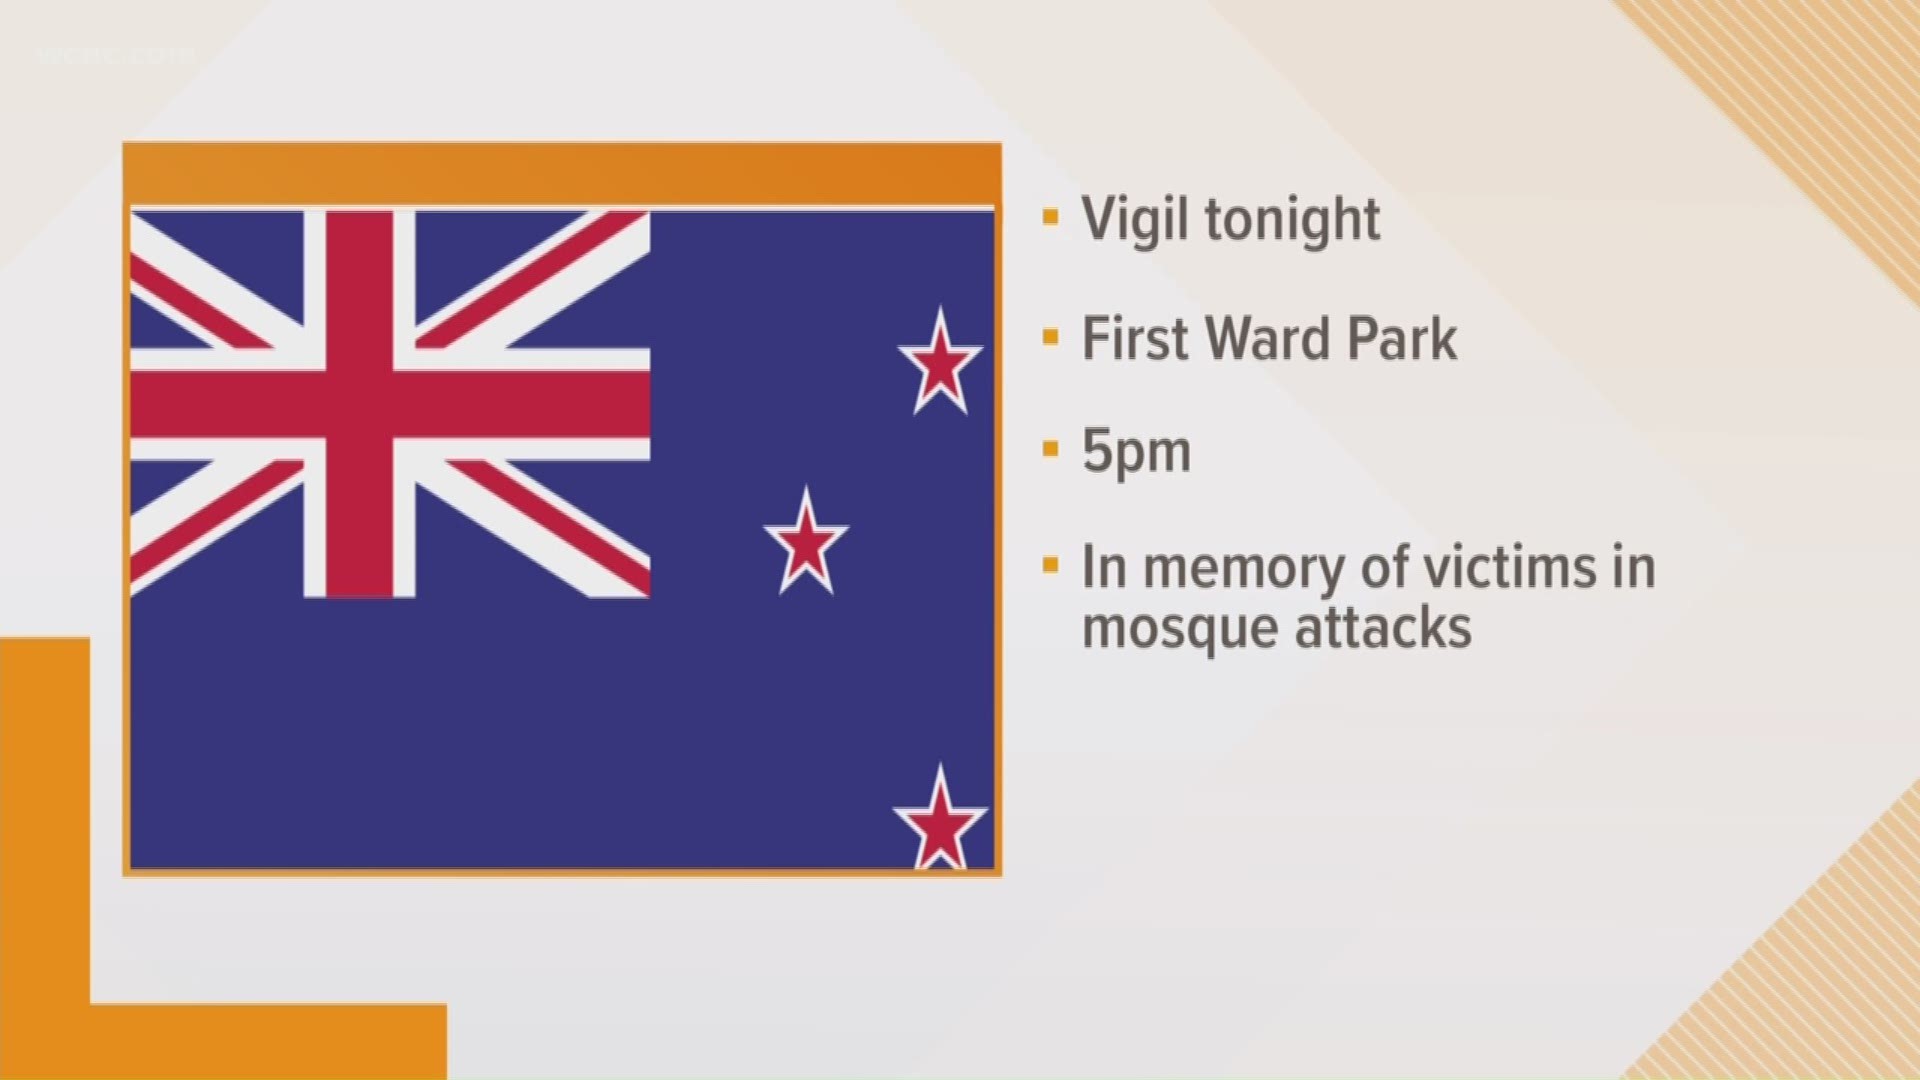 Sunday, a remembrance will be held at 5 p.m. in First Ward Park for the victims killed in the mosque attack in New Zealand.